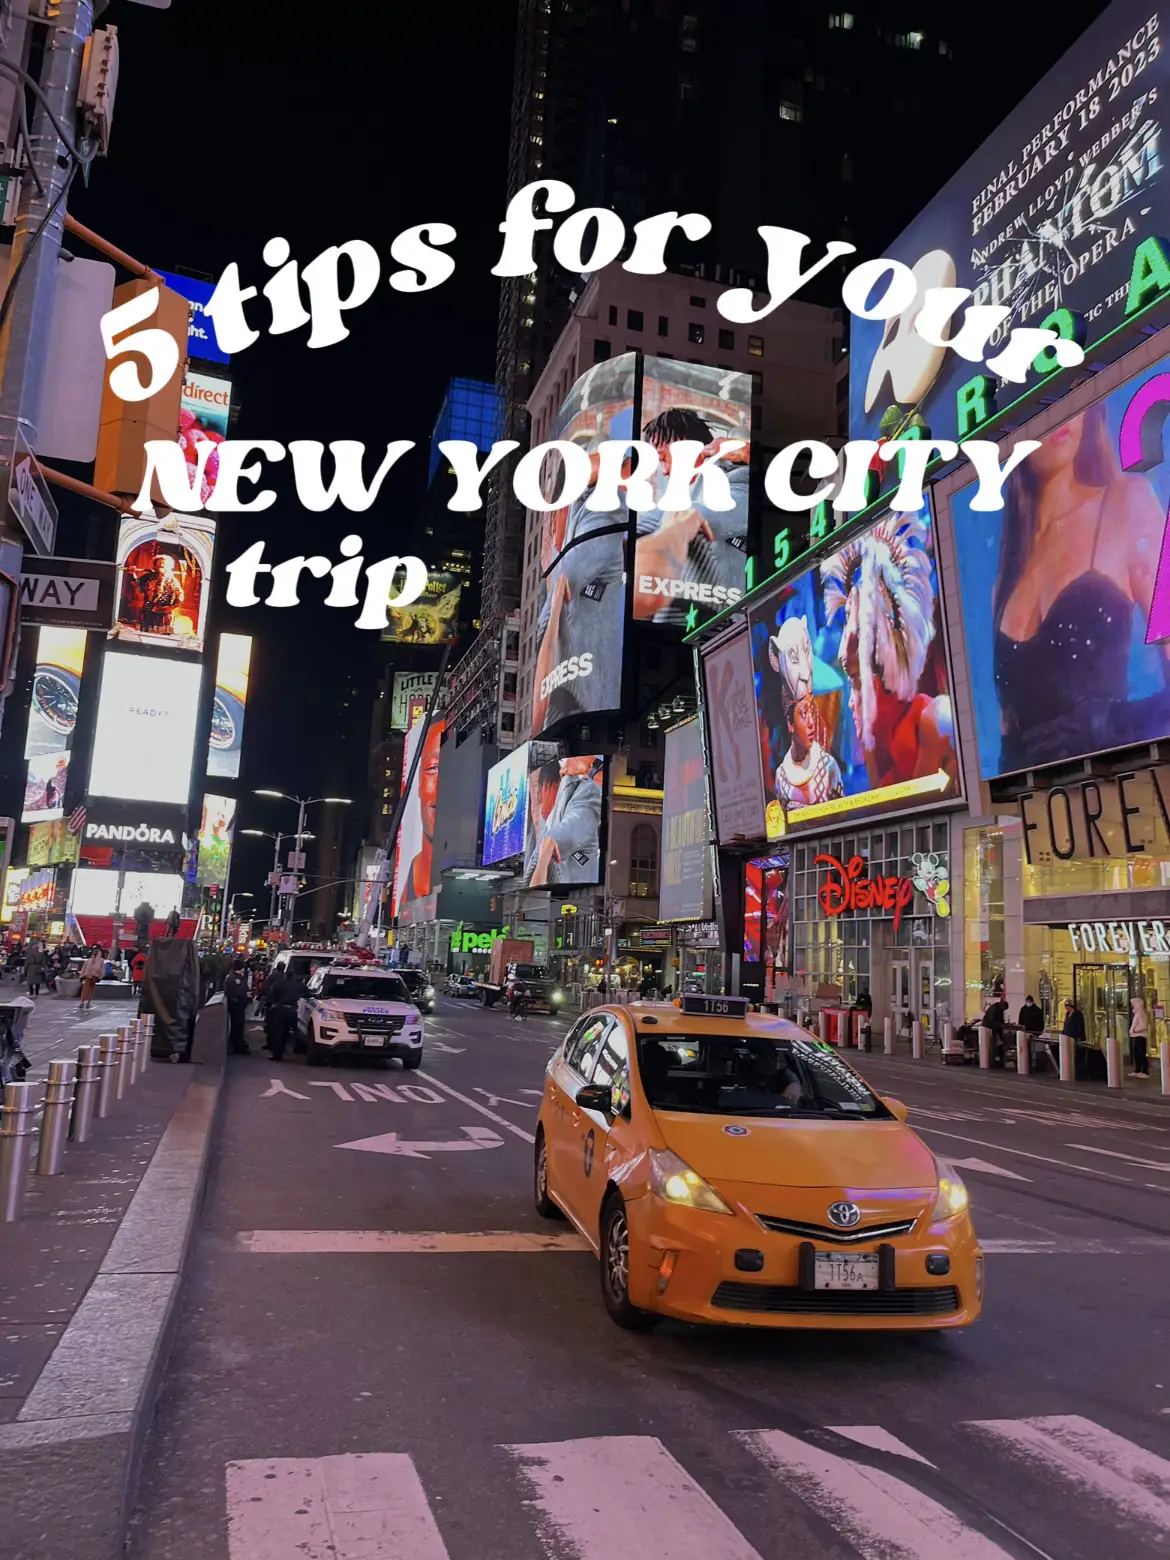  A blue car is driving down a busy city street with a sign that says "5 tips for New York City". The car is